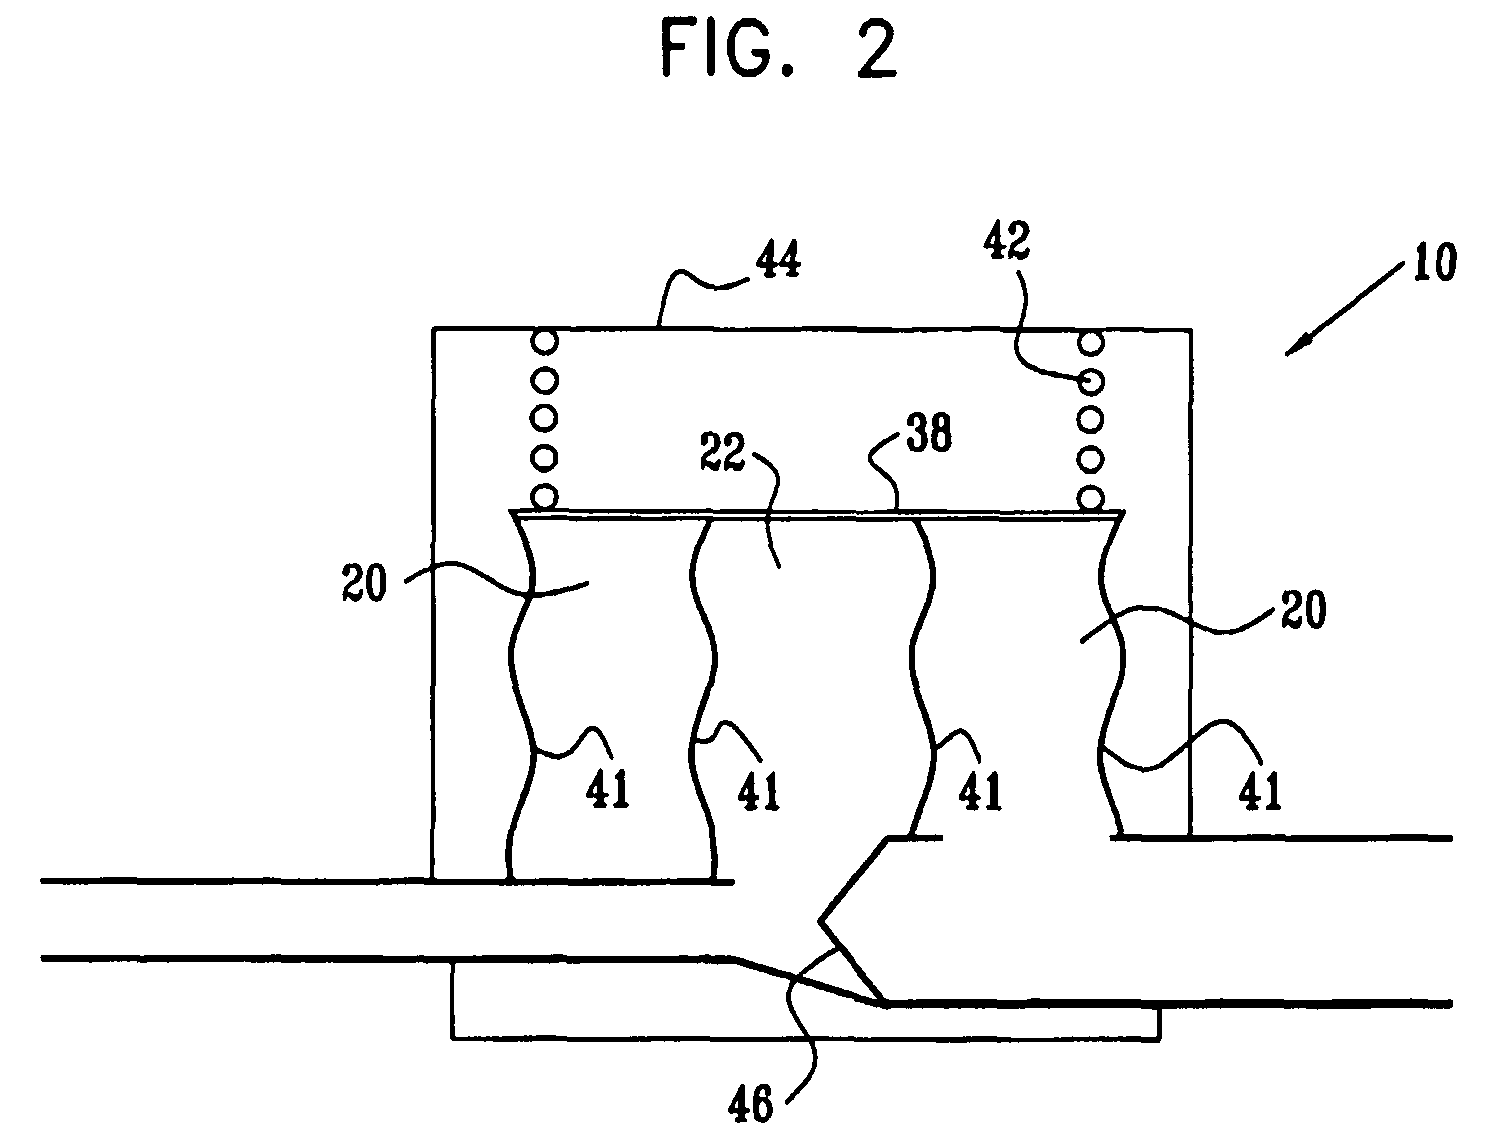 Extracardiac blood flow amplification device